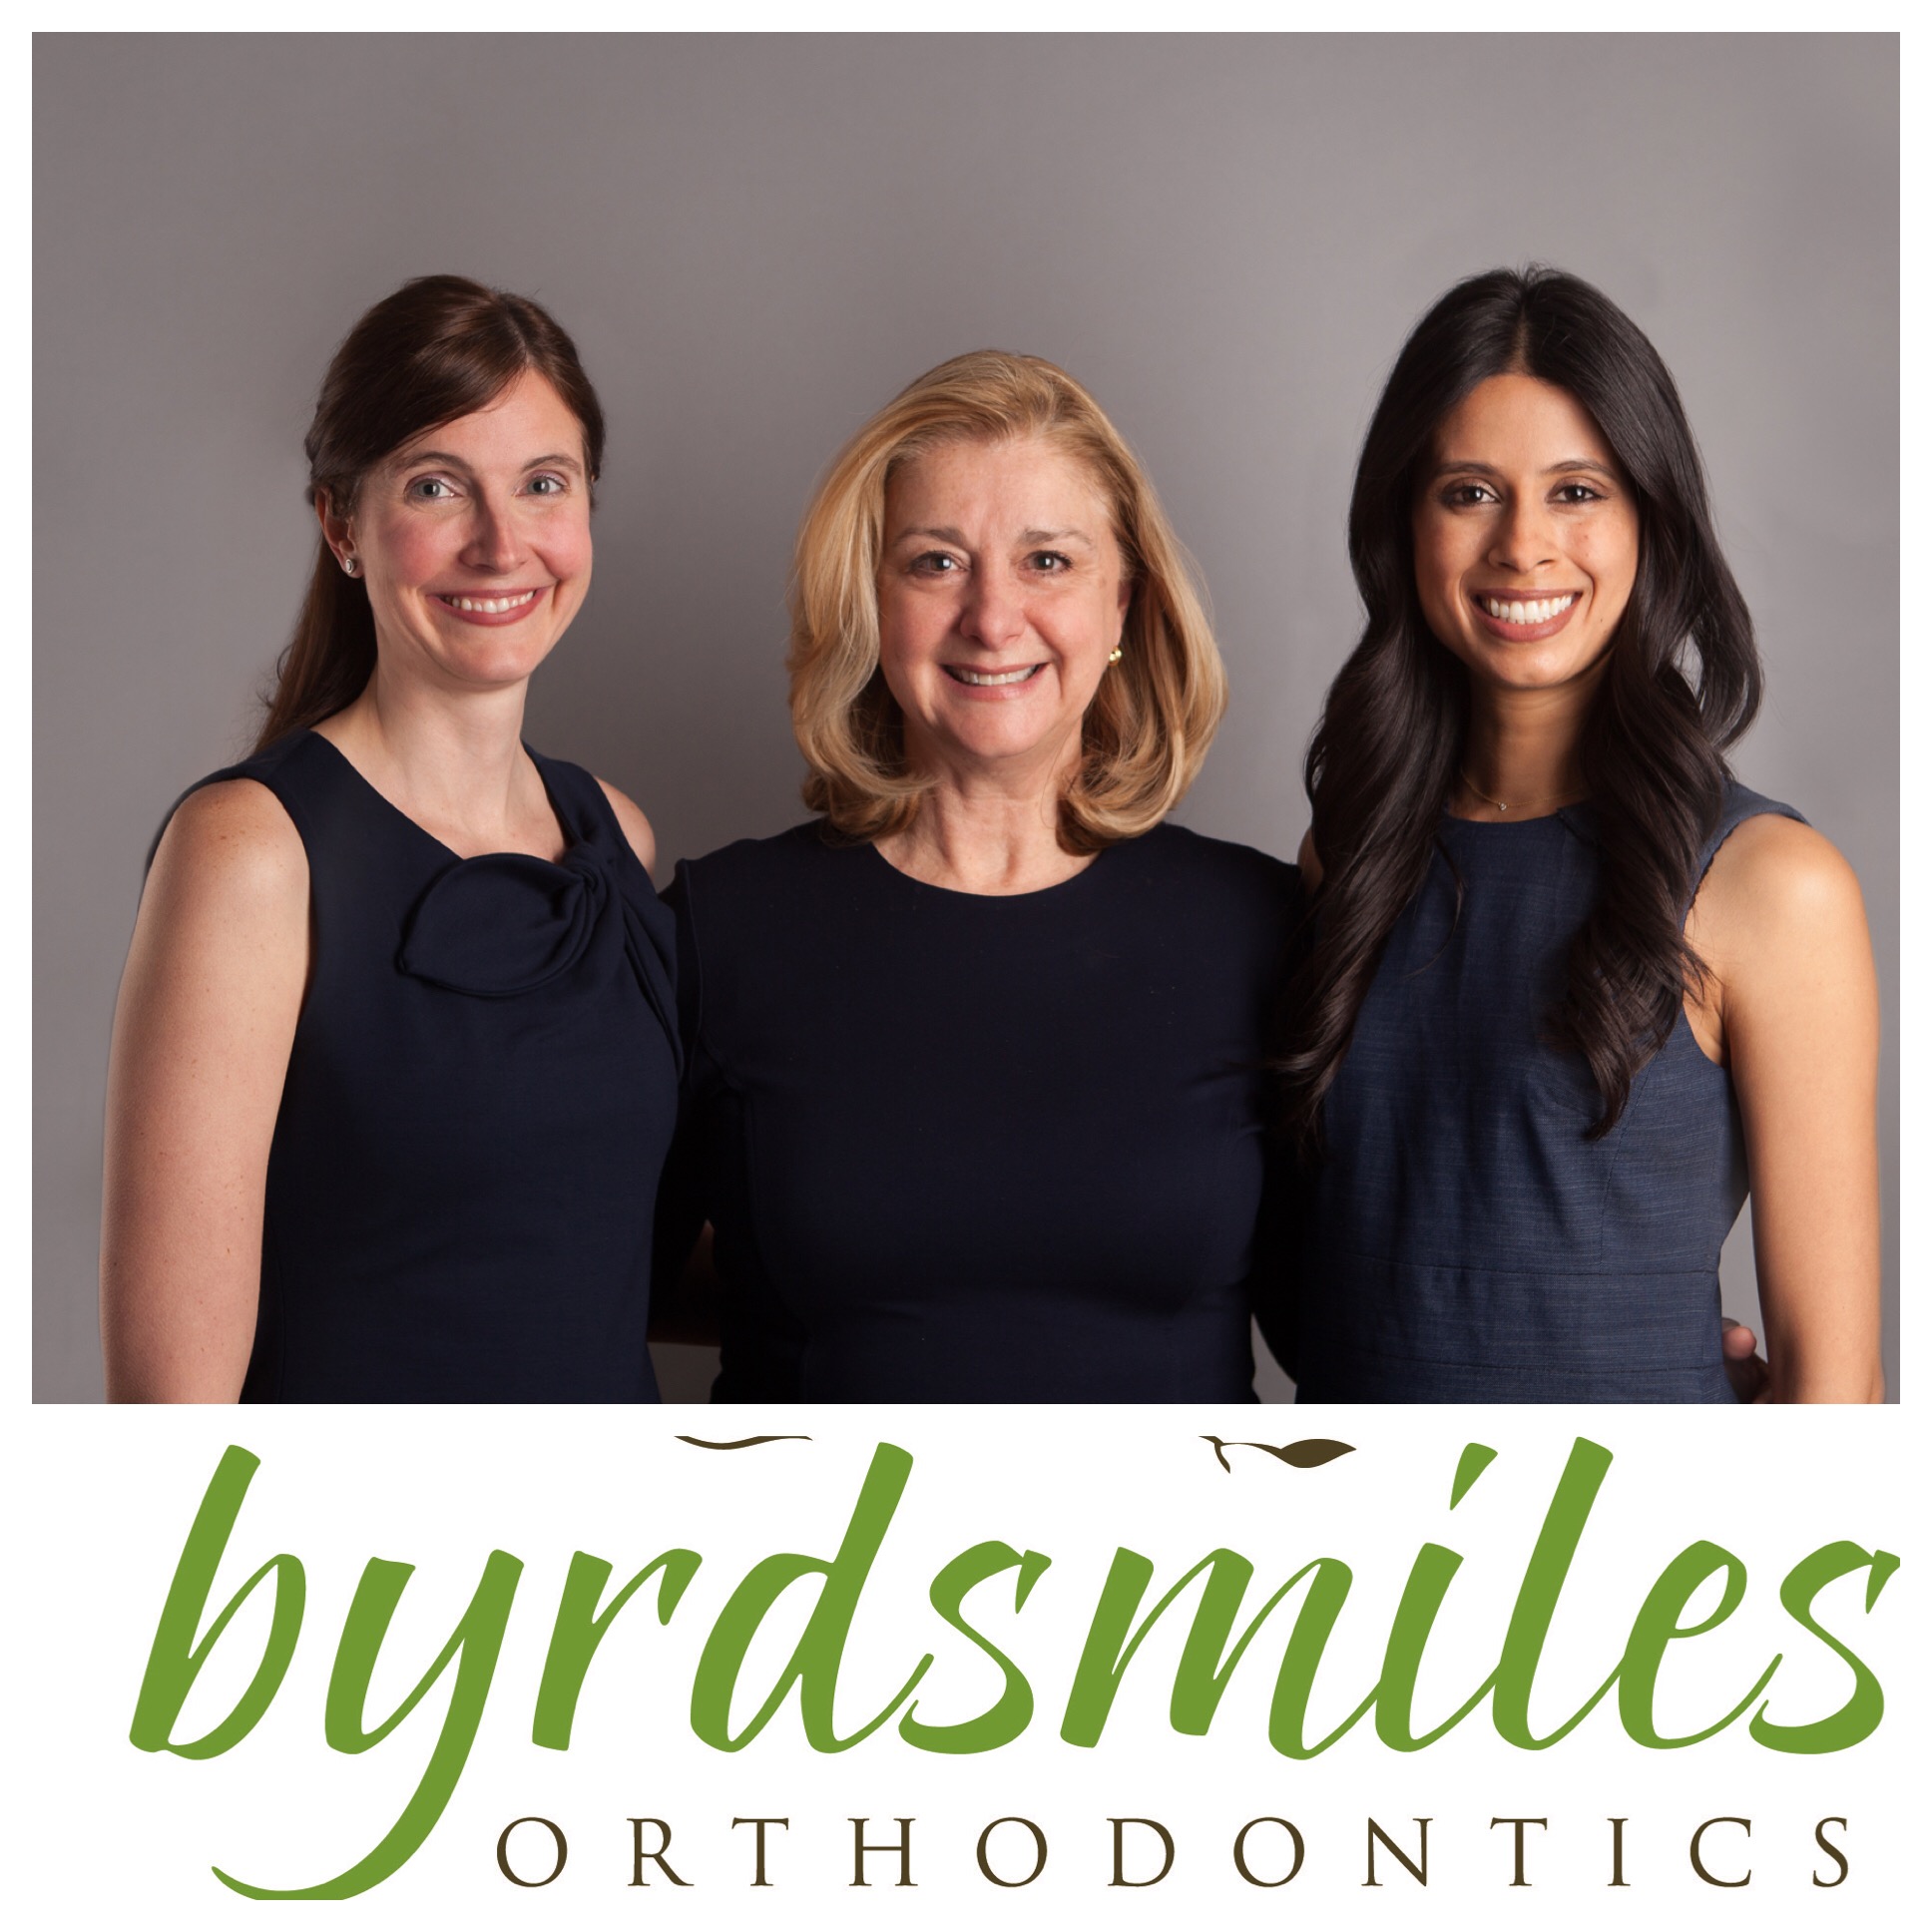 Byrdsmiles Orthodontics – Complimentary exams for adults, teens and children!